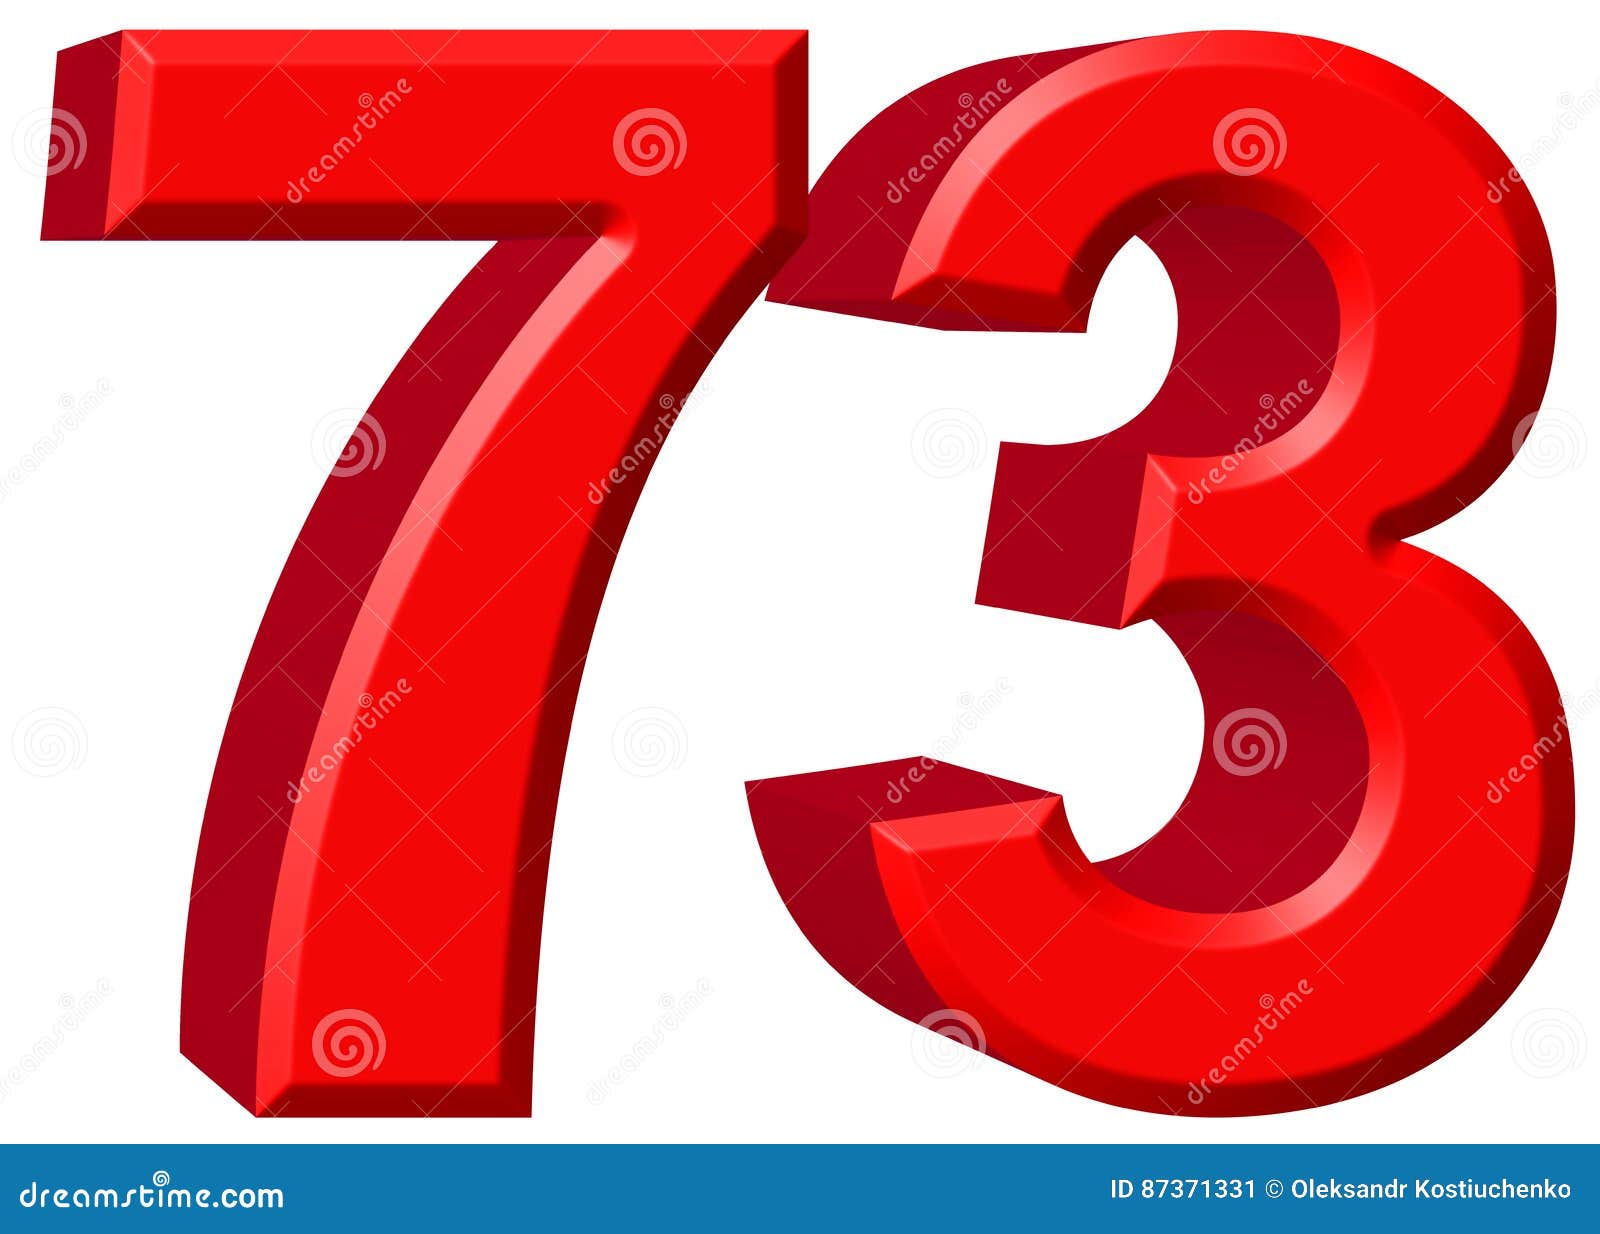 numeral-73-stock-illustrations-40-numeral-73-stock-illustrations